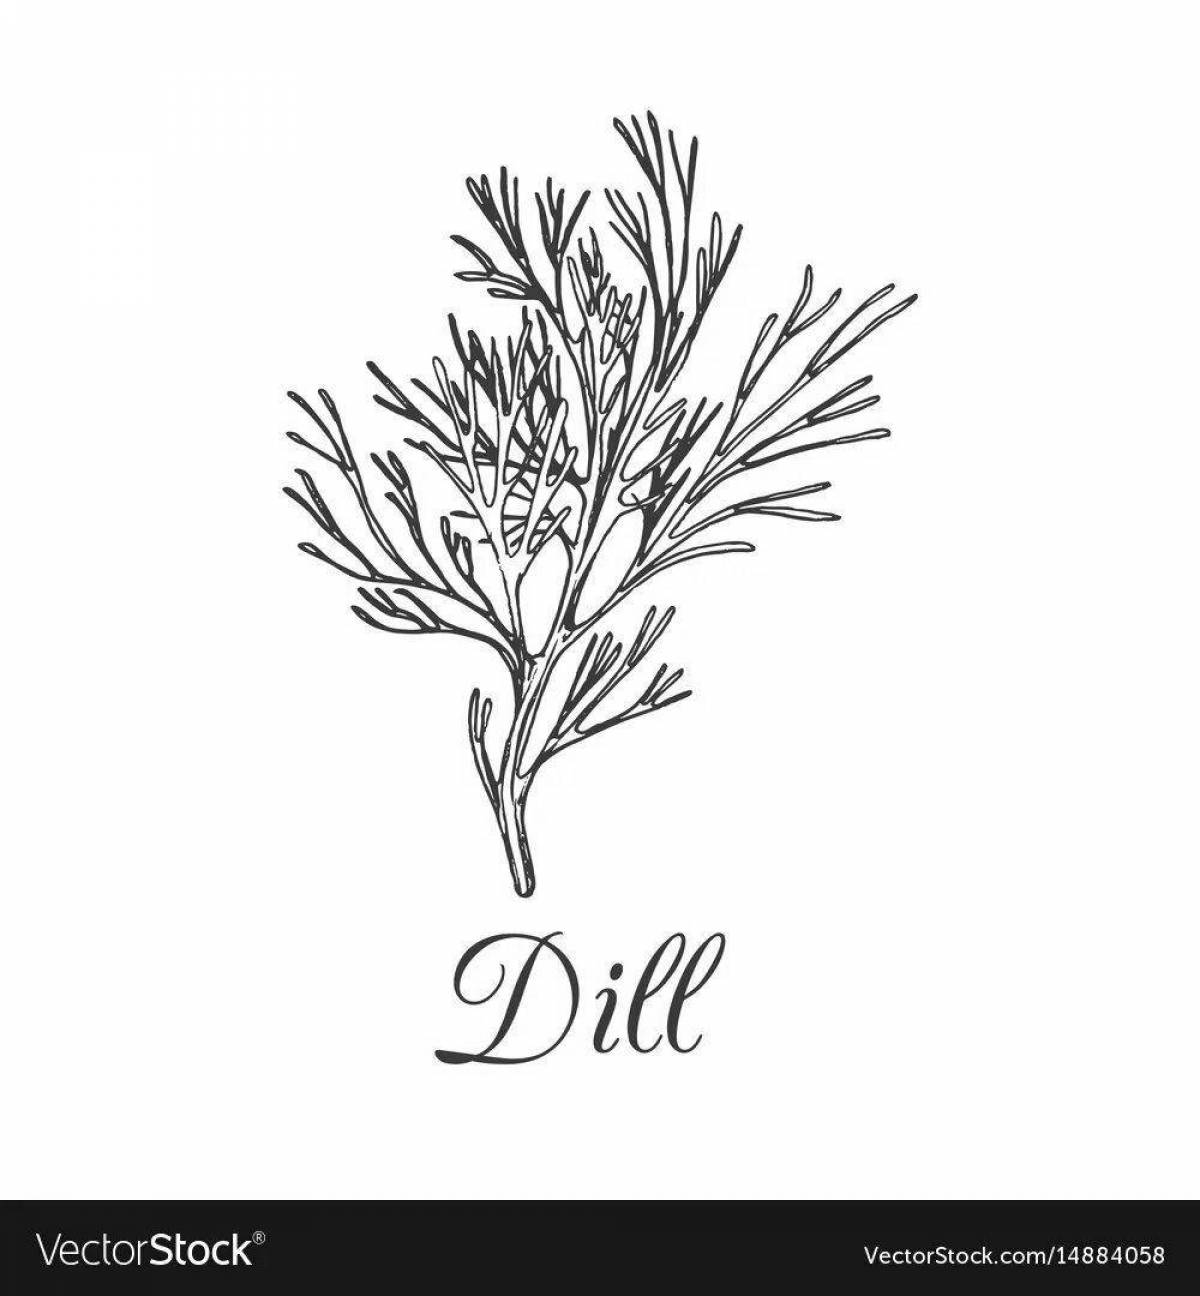 Colouring cheerful dill